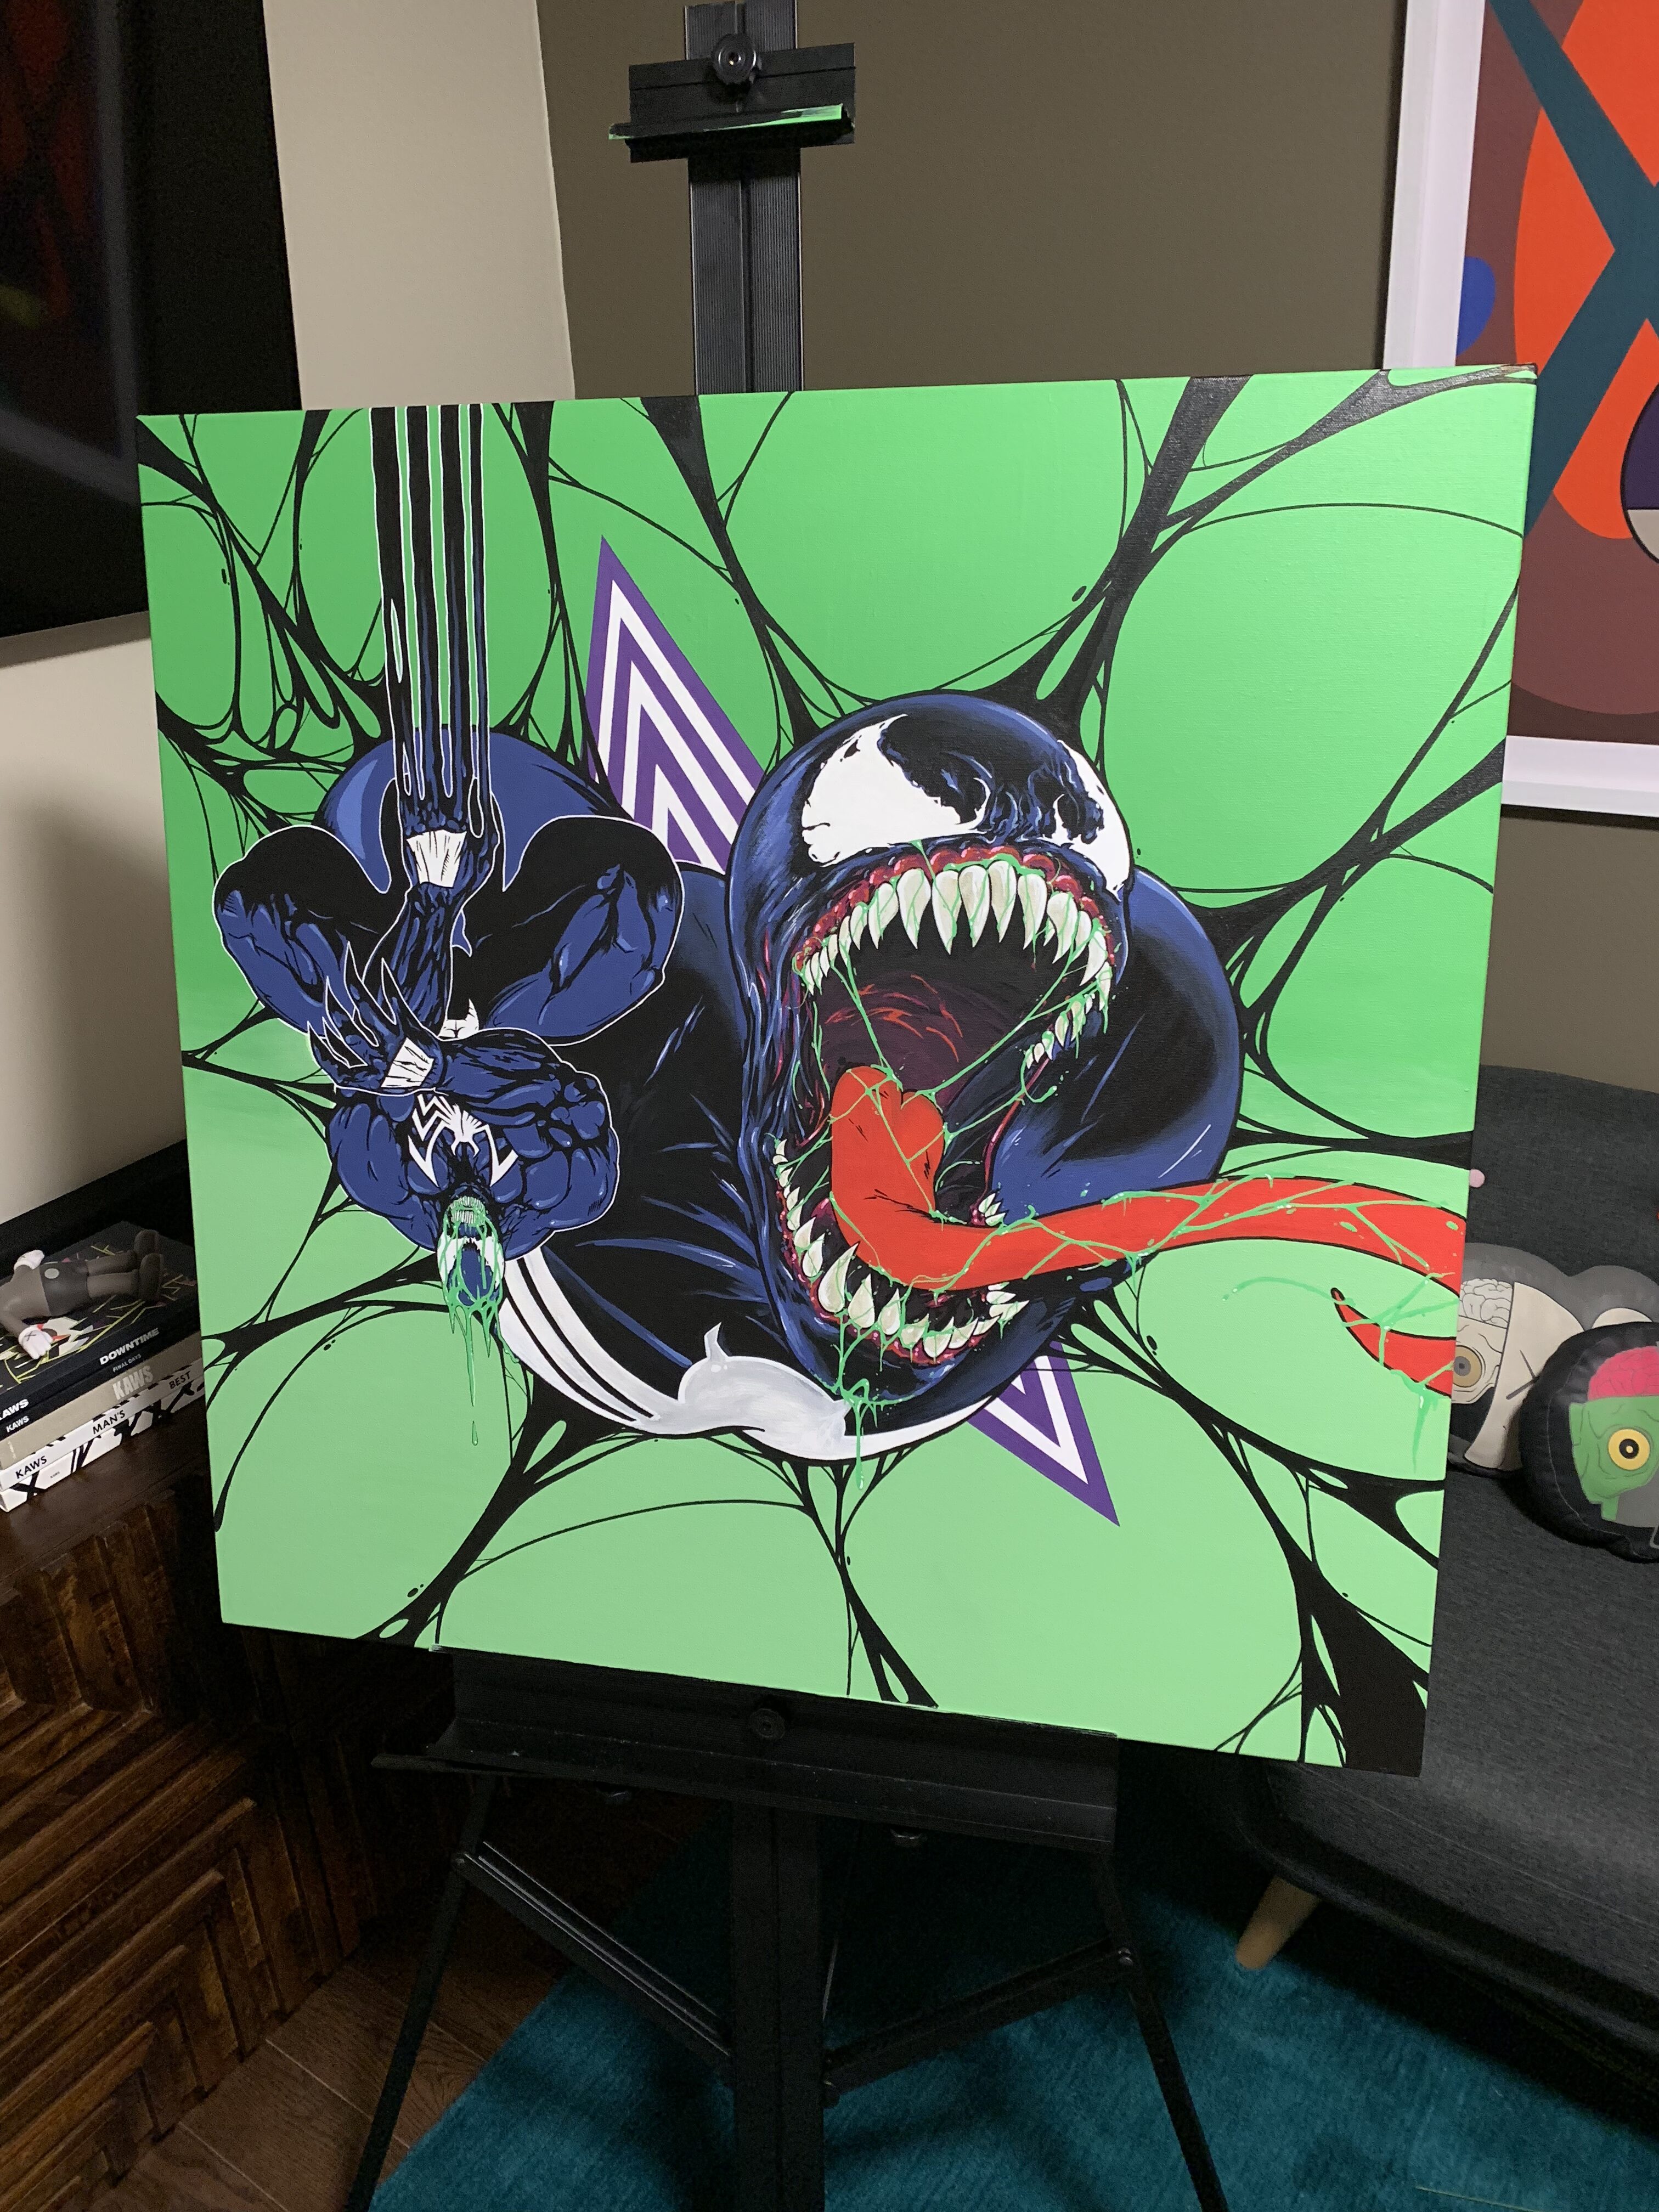 Venom by Nover, 36x36", Paint on Canvas, 2019.